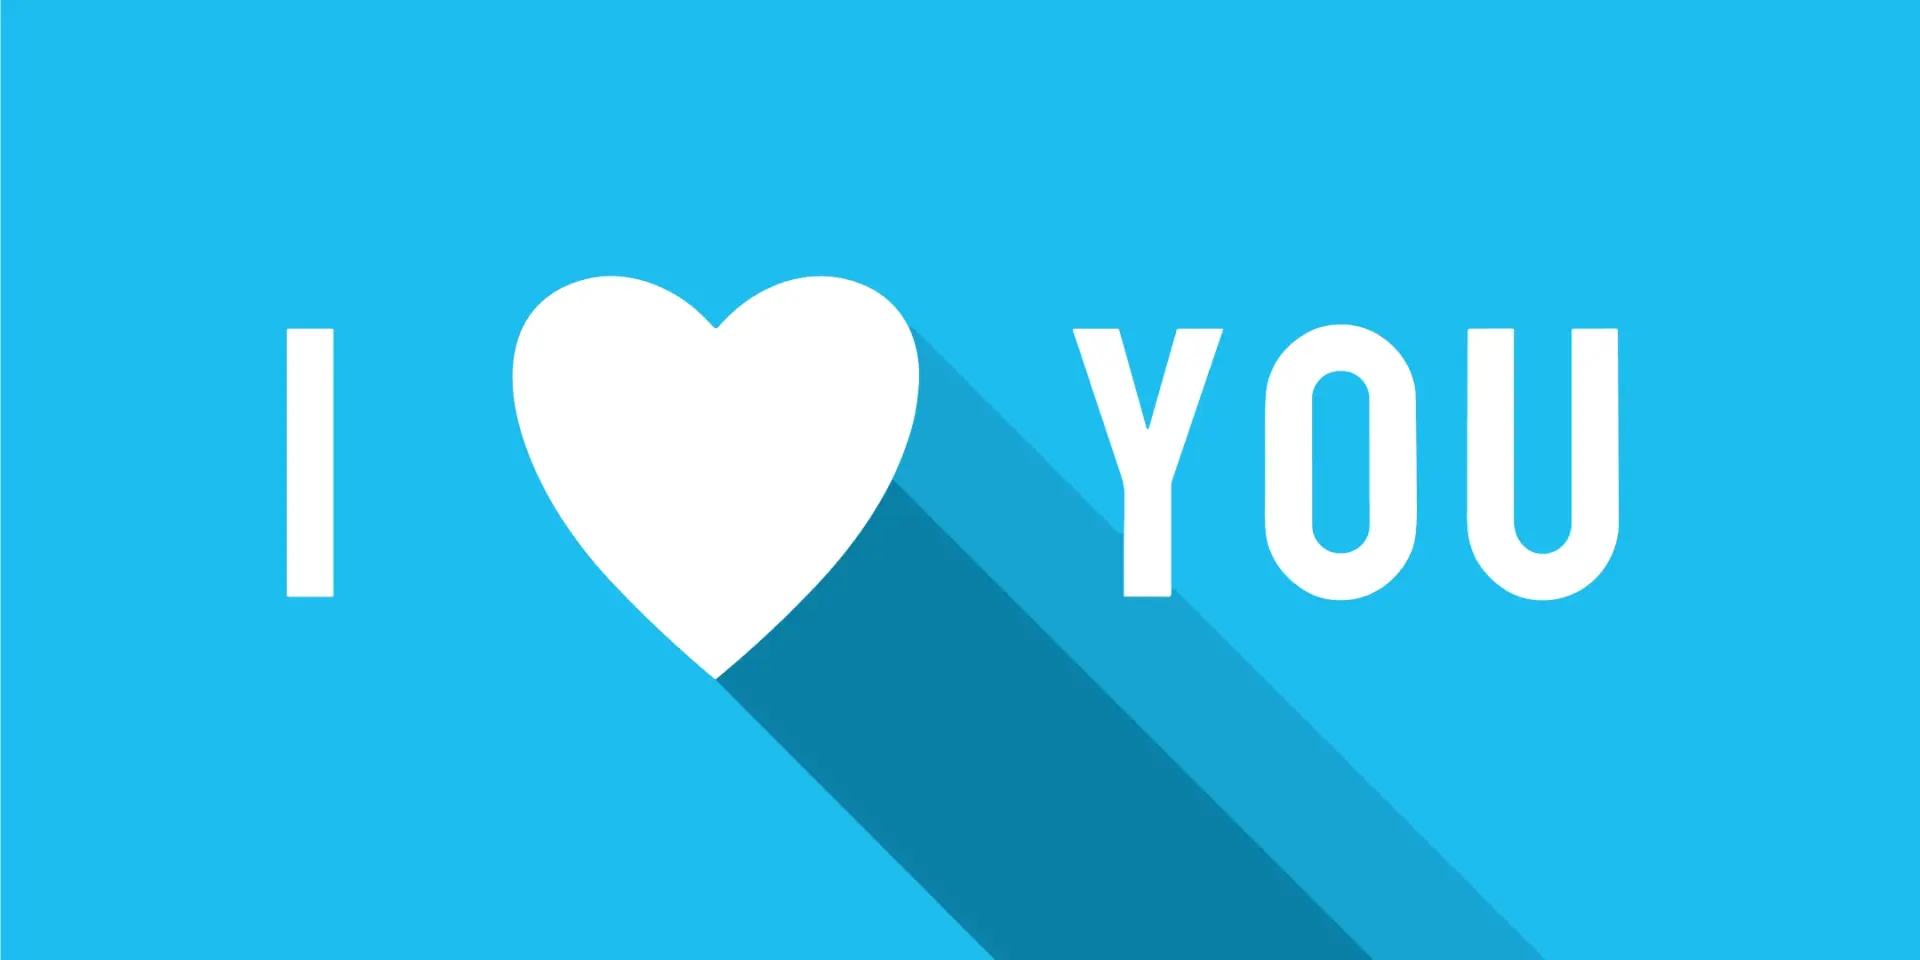 A blue illustrated graphic that says "I <3 You" in bold letters 